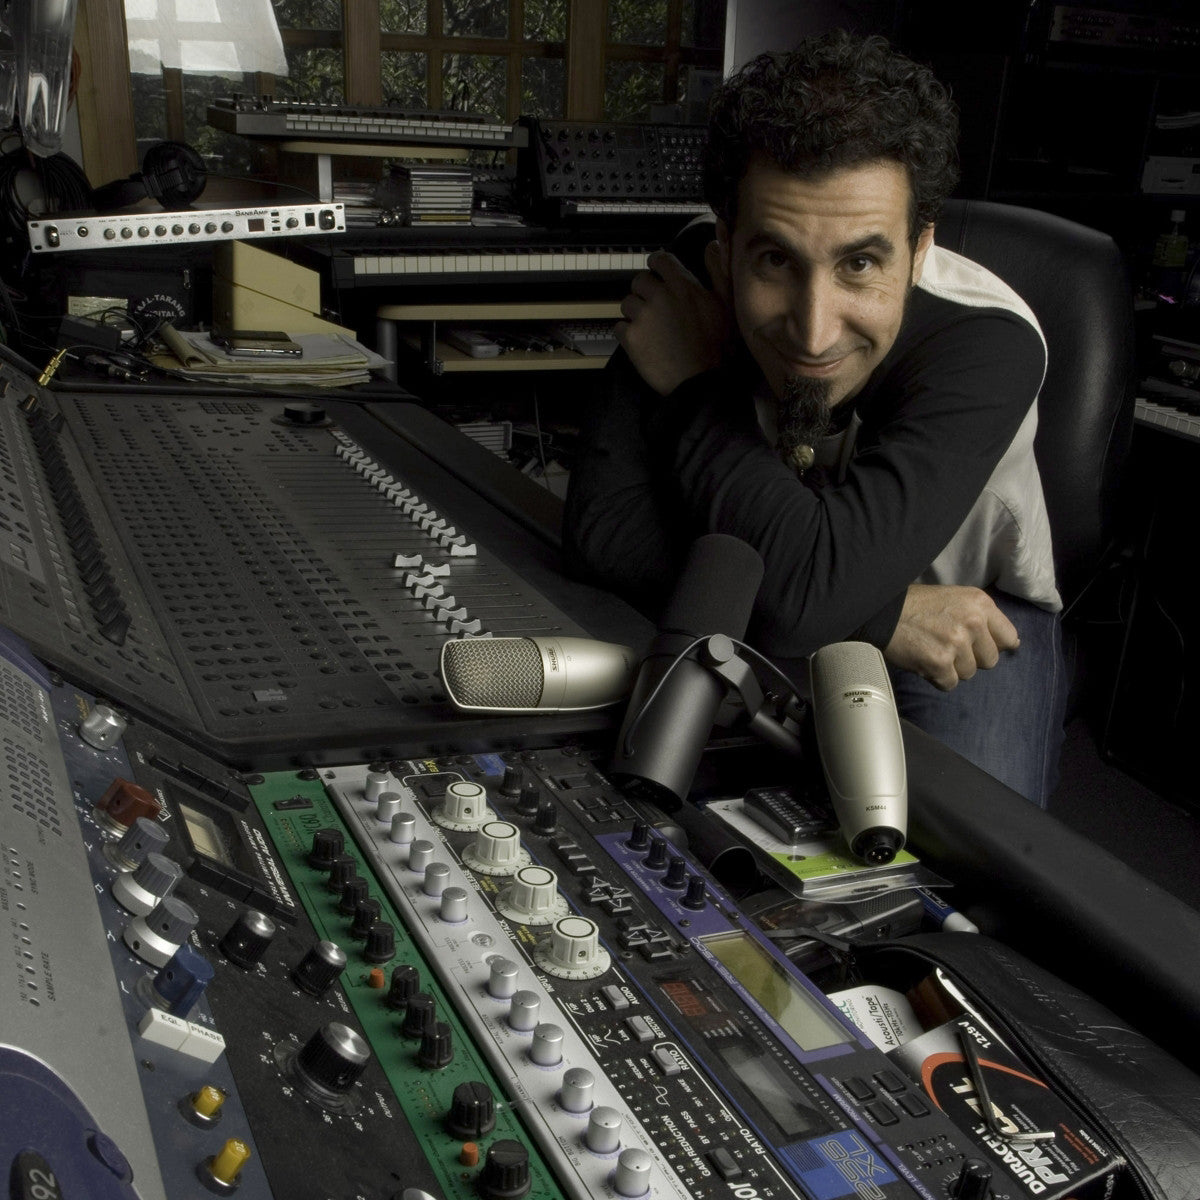 Serj Releasing Two Albums in June and July, Announces Tour Dates